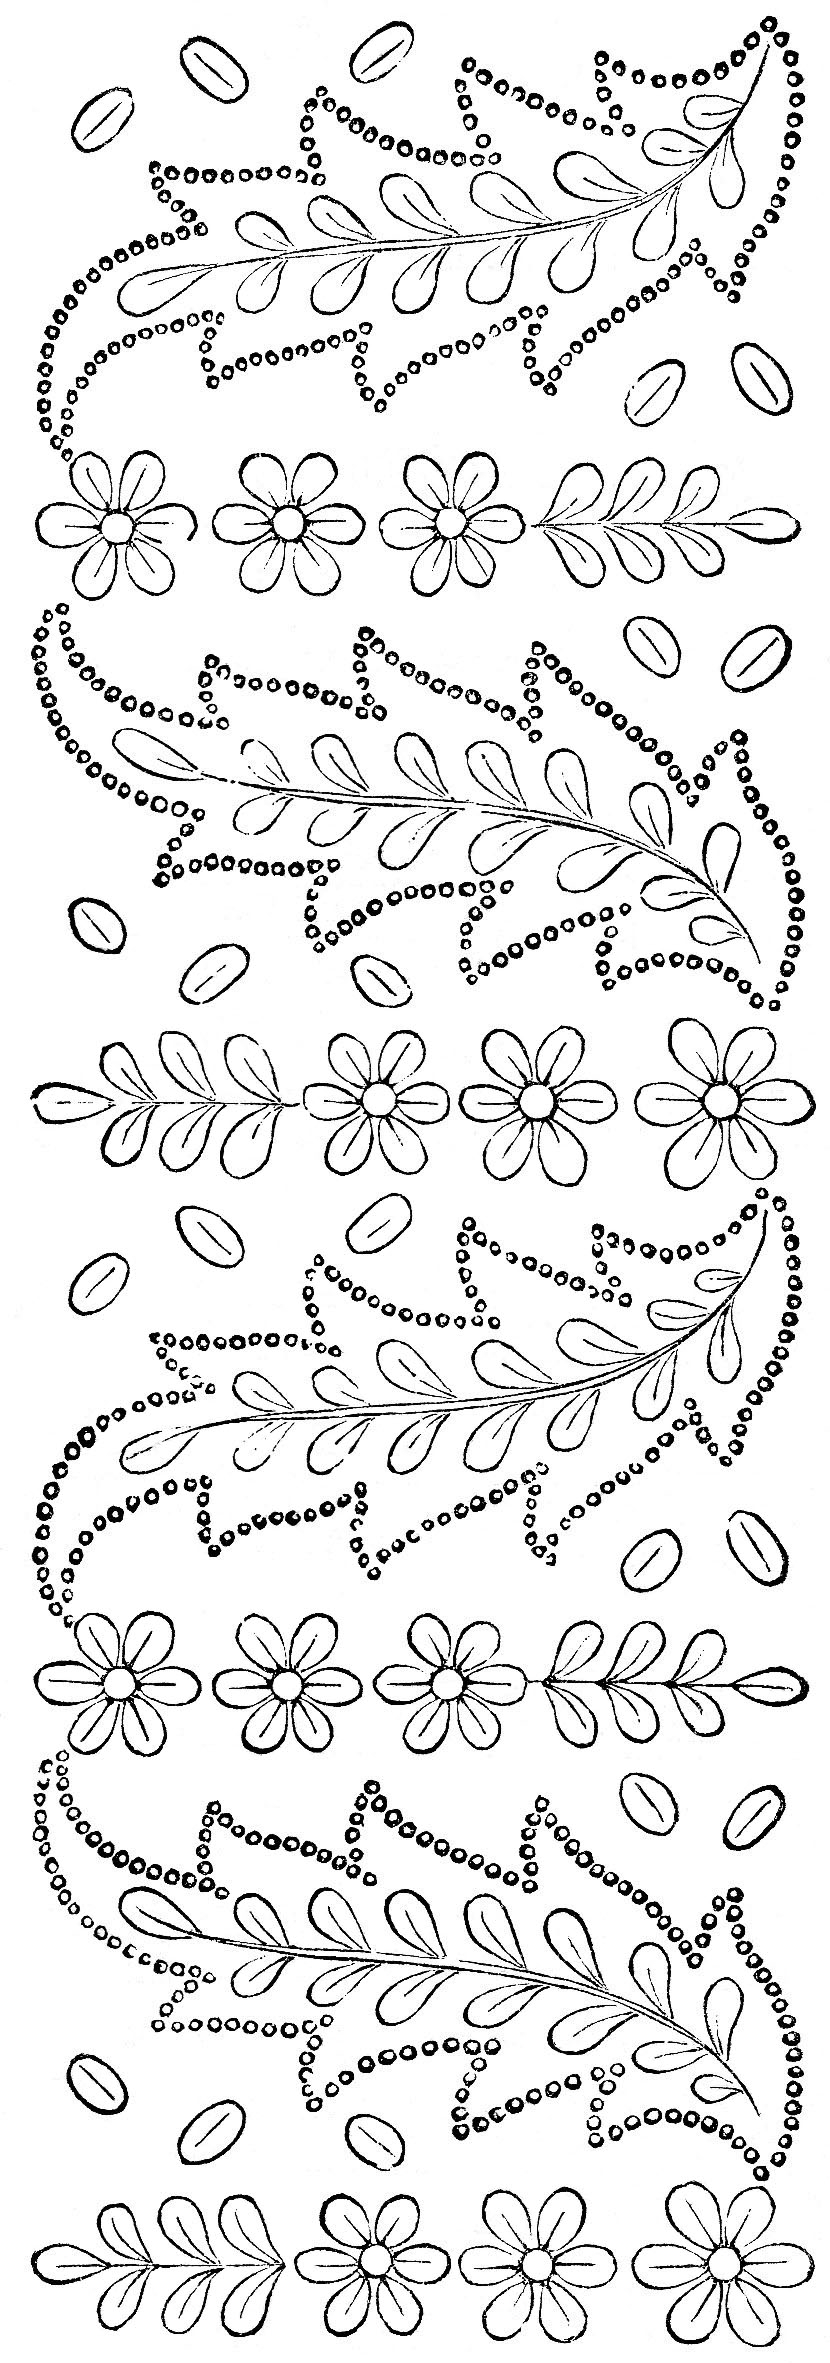 Free Hand Embroidery Patterns Free Vintage Embroidery Pattern For Hand Stitching Vintage Crafts